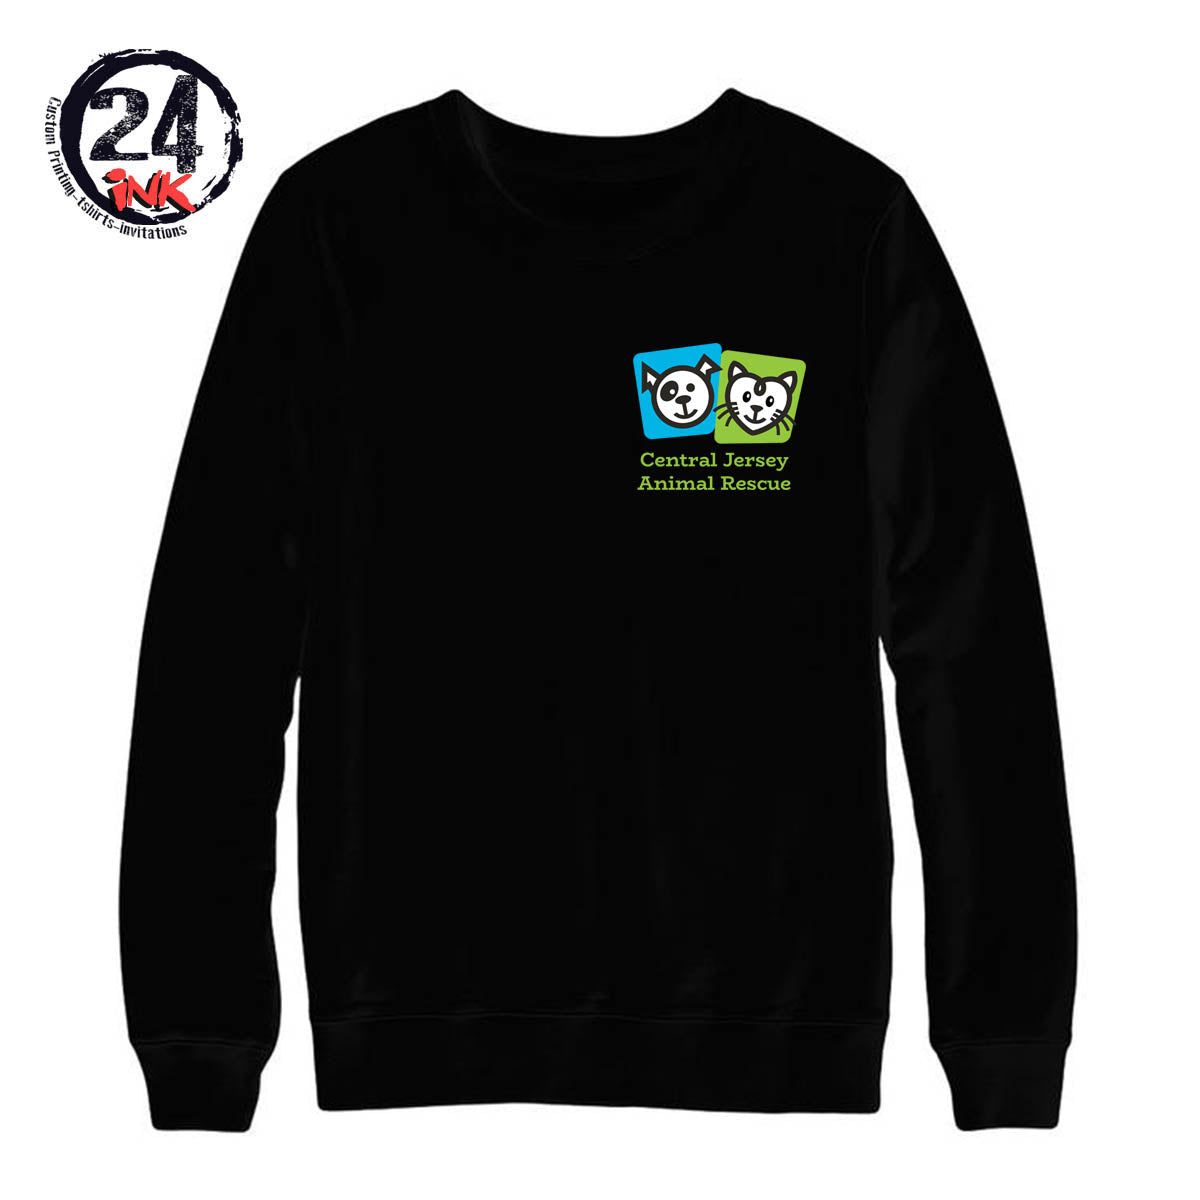 Central Jersey Animal Rescue Left Chest non hooded sweatshirt